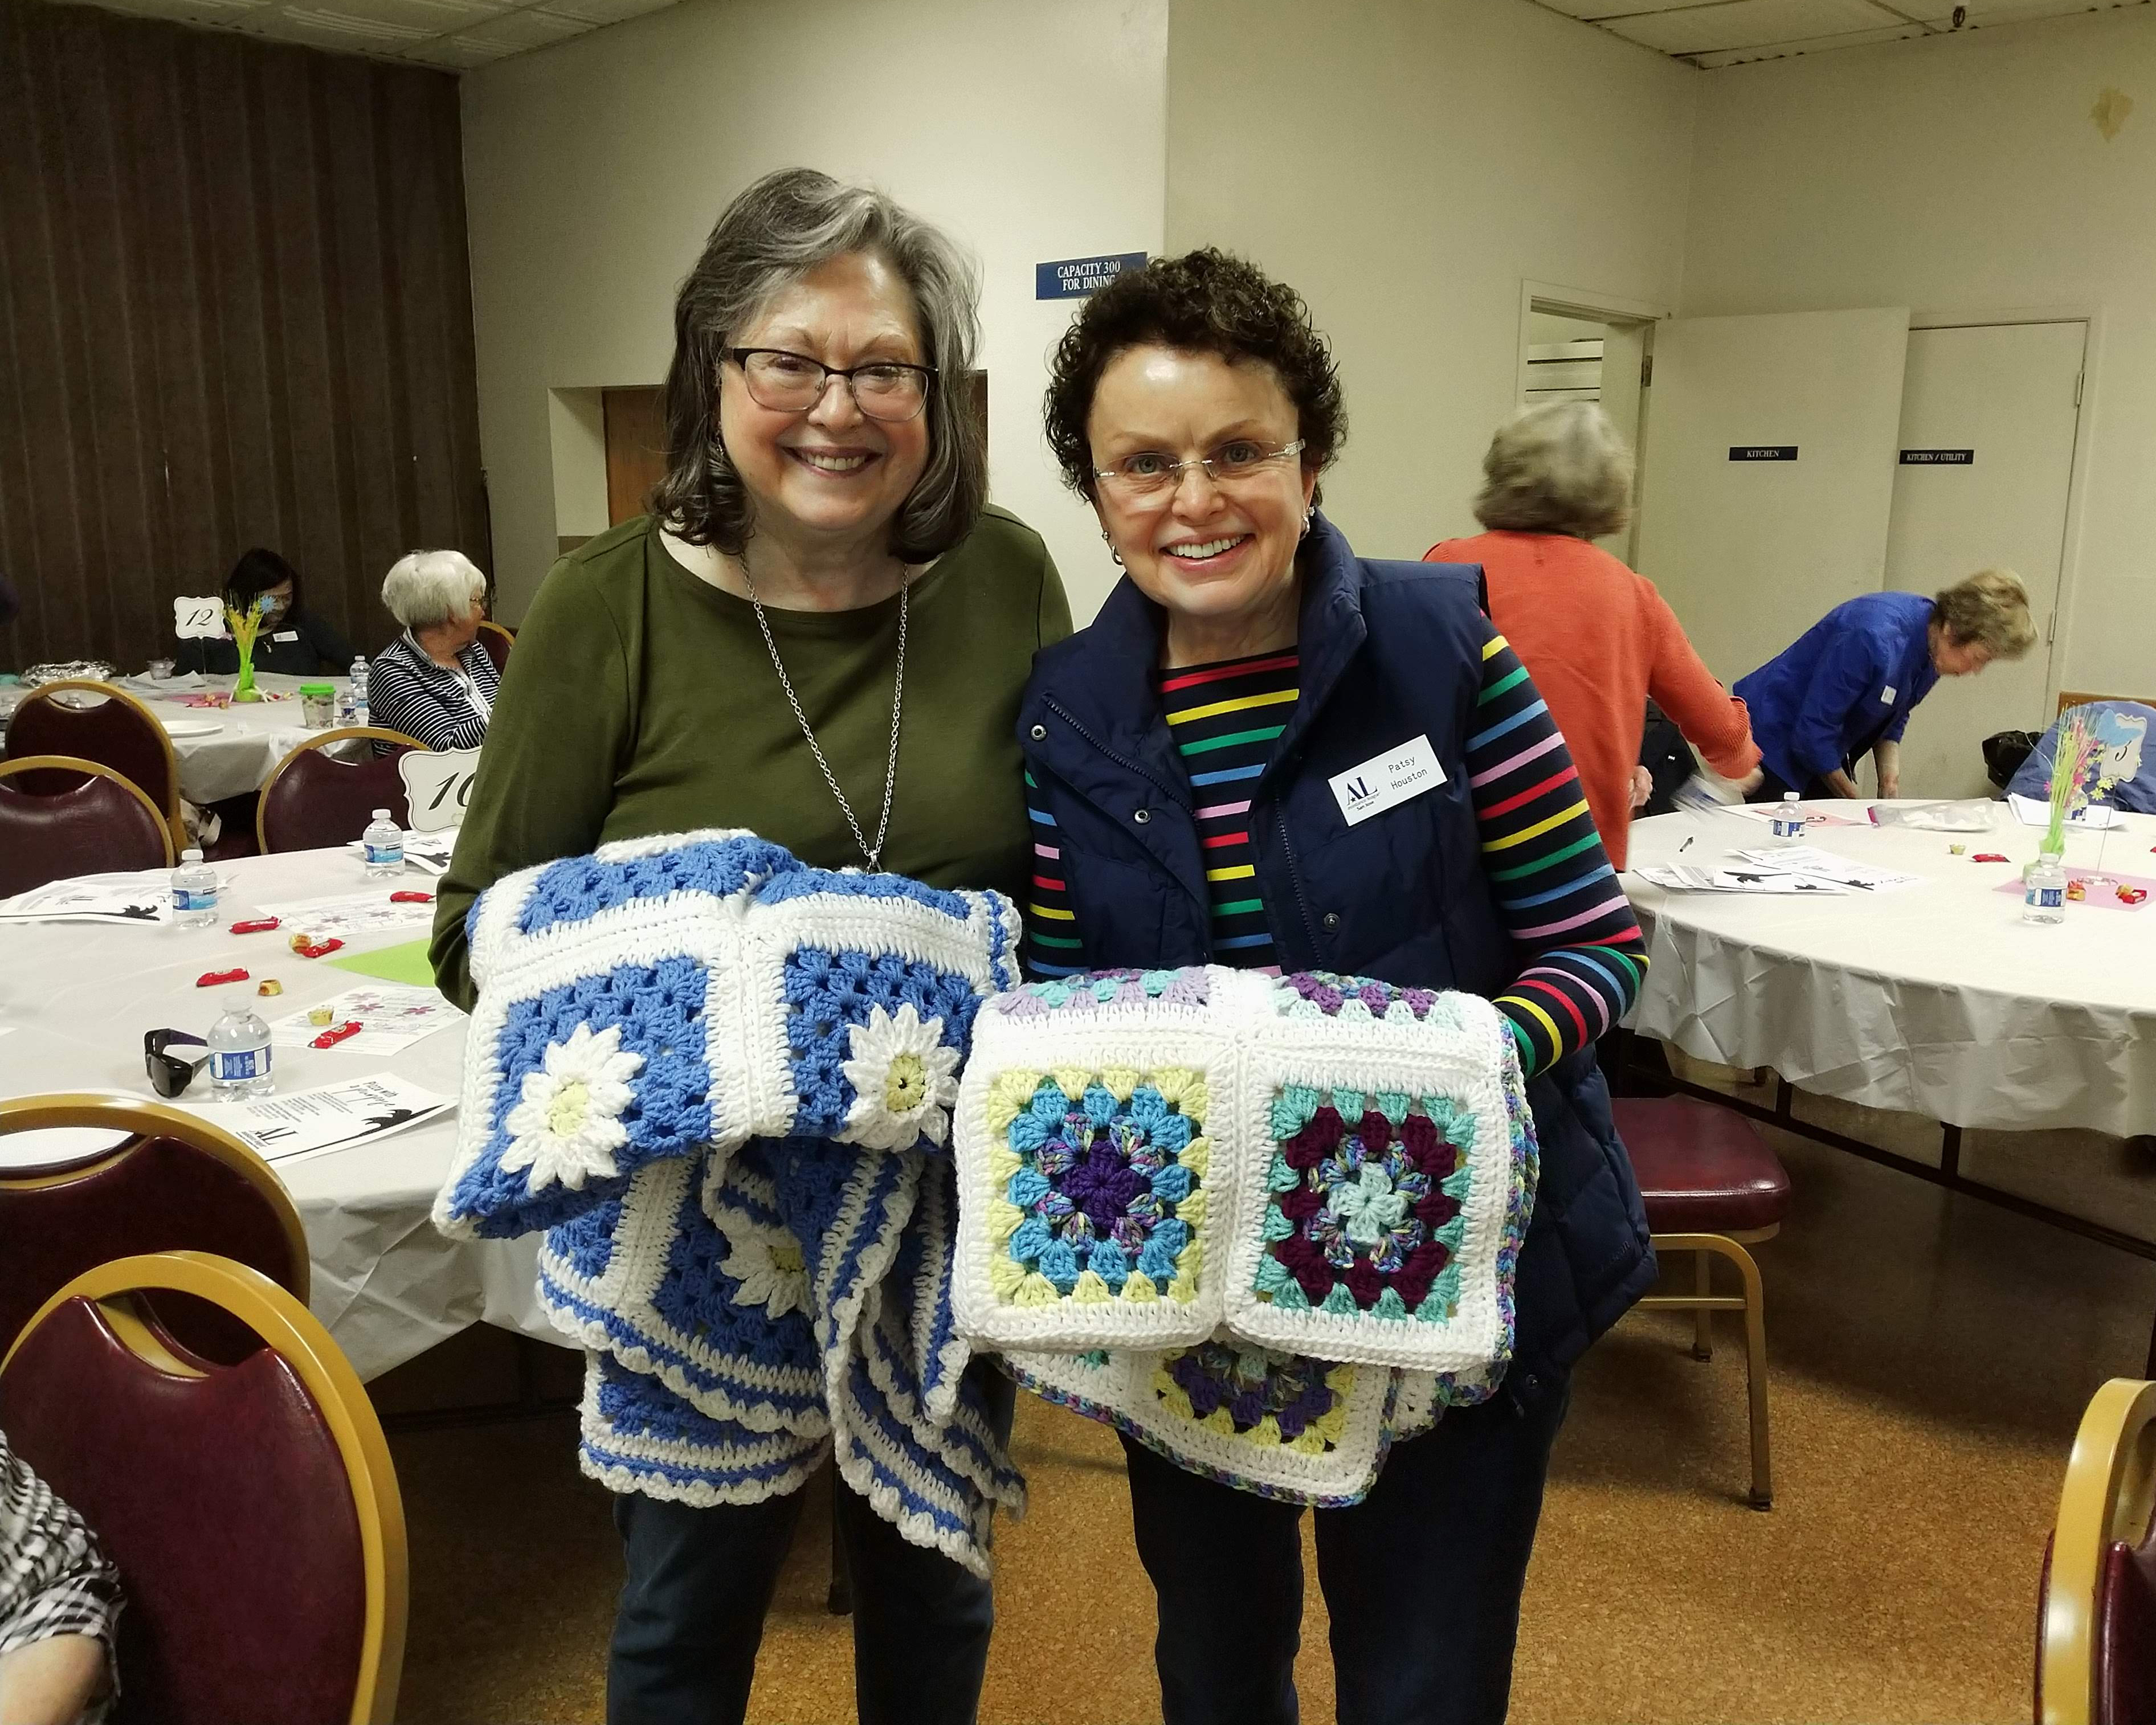 Members with crocheted afghans